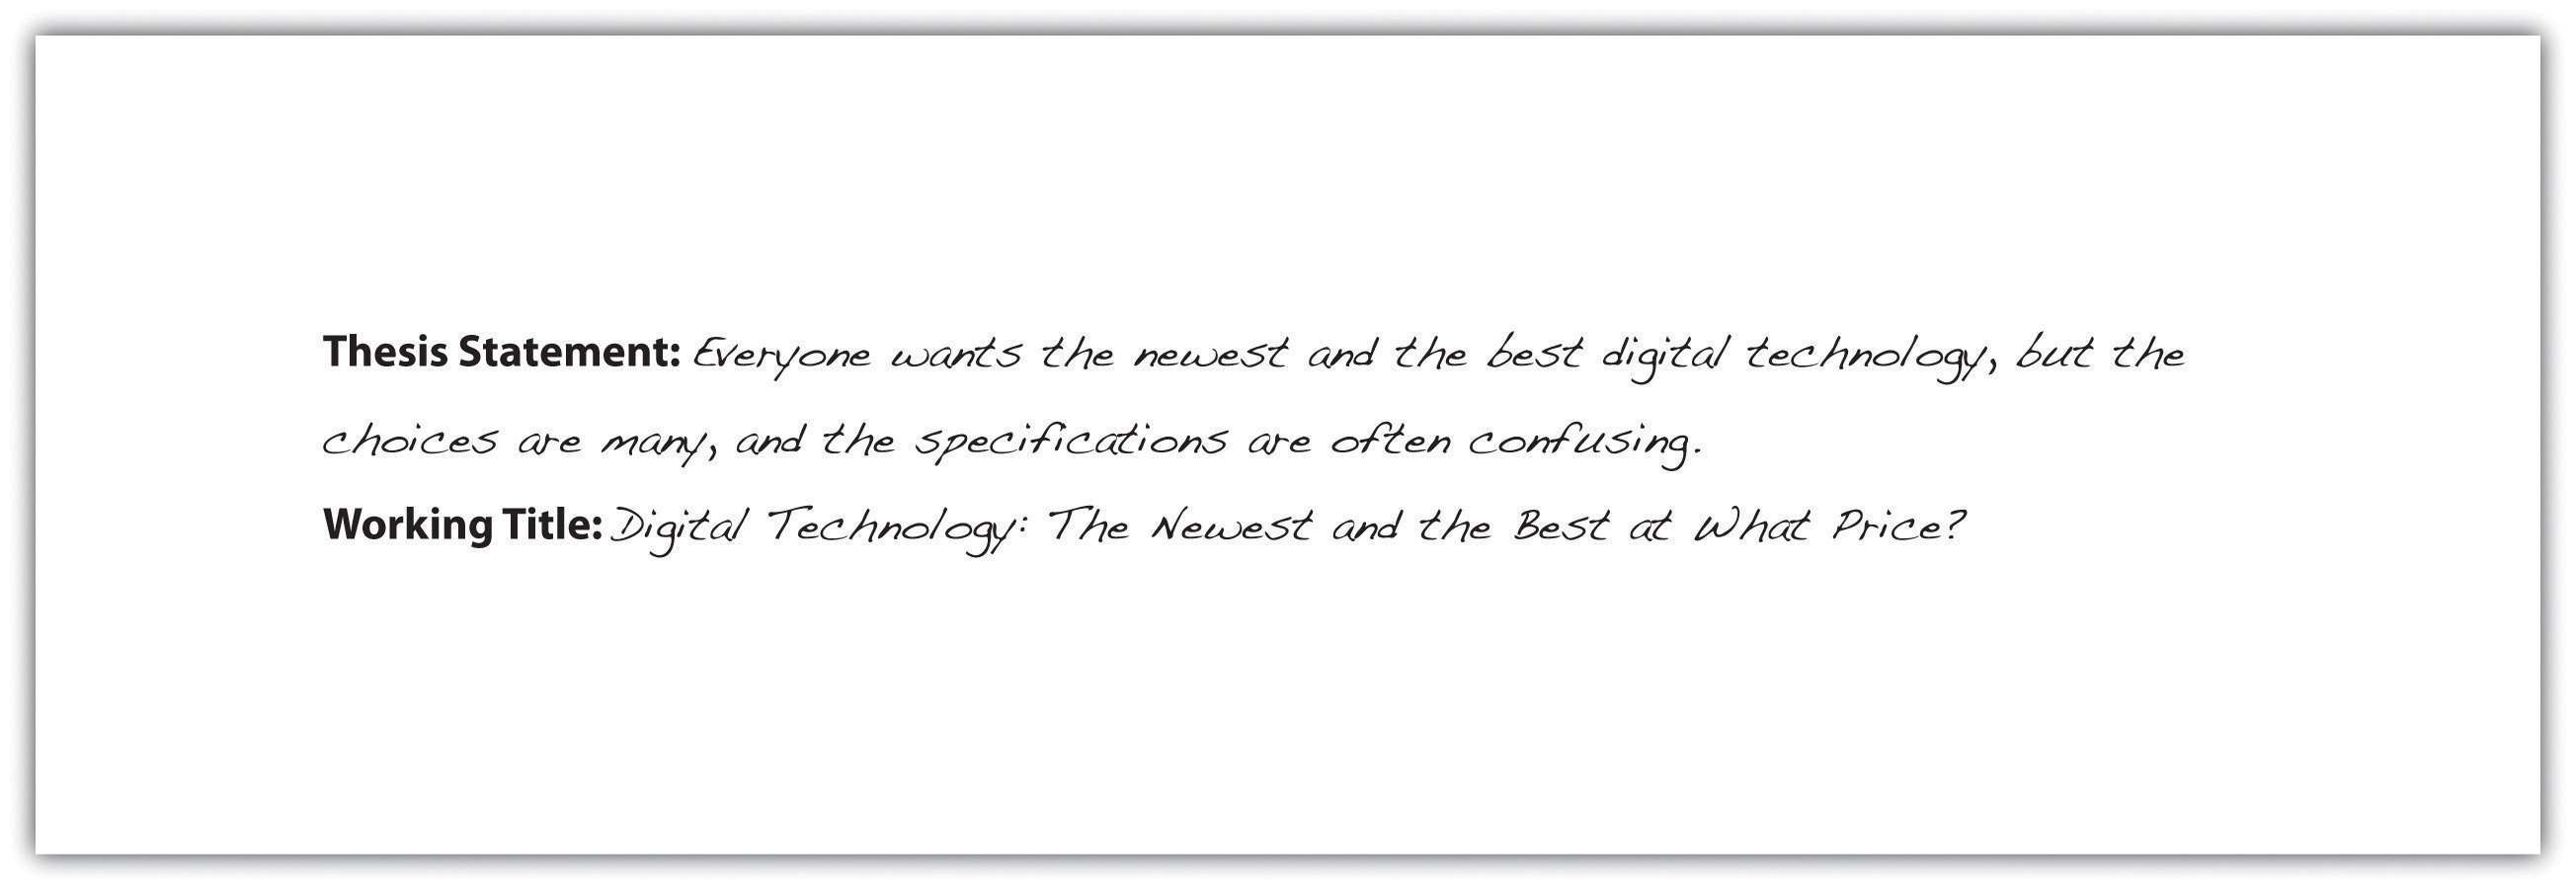 Thesis Statement: Everyone wants the newest and the best digital technology, but the choices are many, and the specifications are often confusing. Working Title: Digital Technology: The Newest and the Best at What Price?